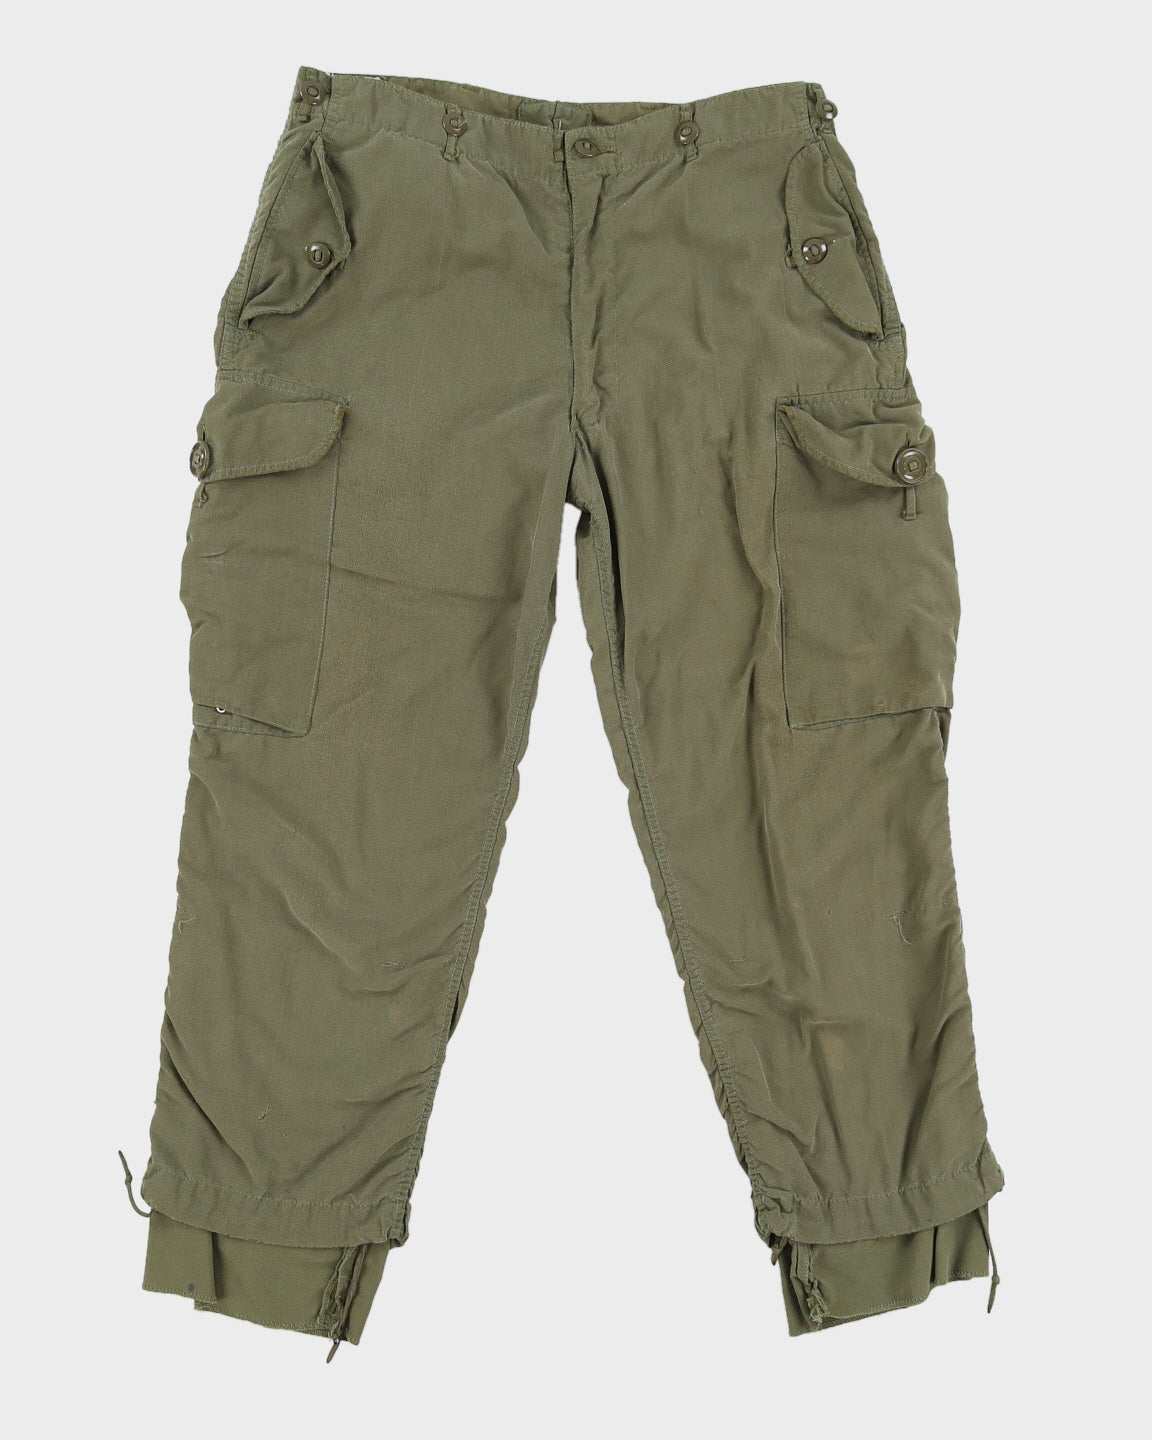 80s Canadian Army Lightweight Combat Trousers - 34x24